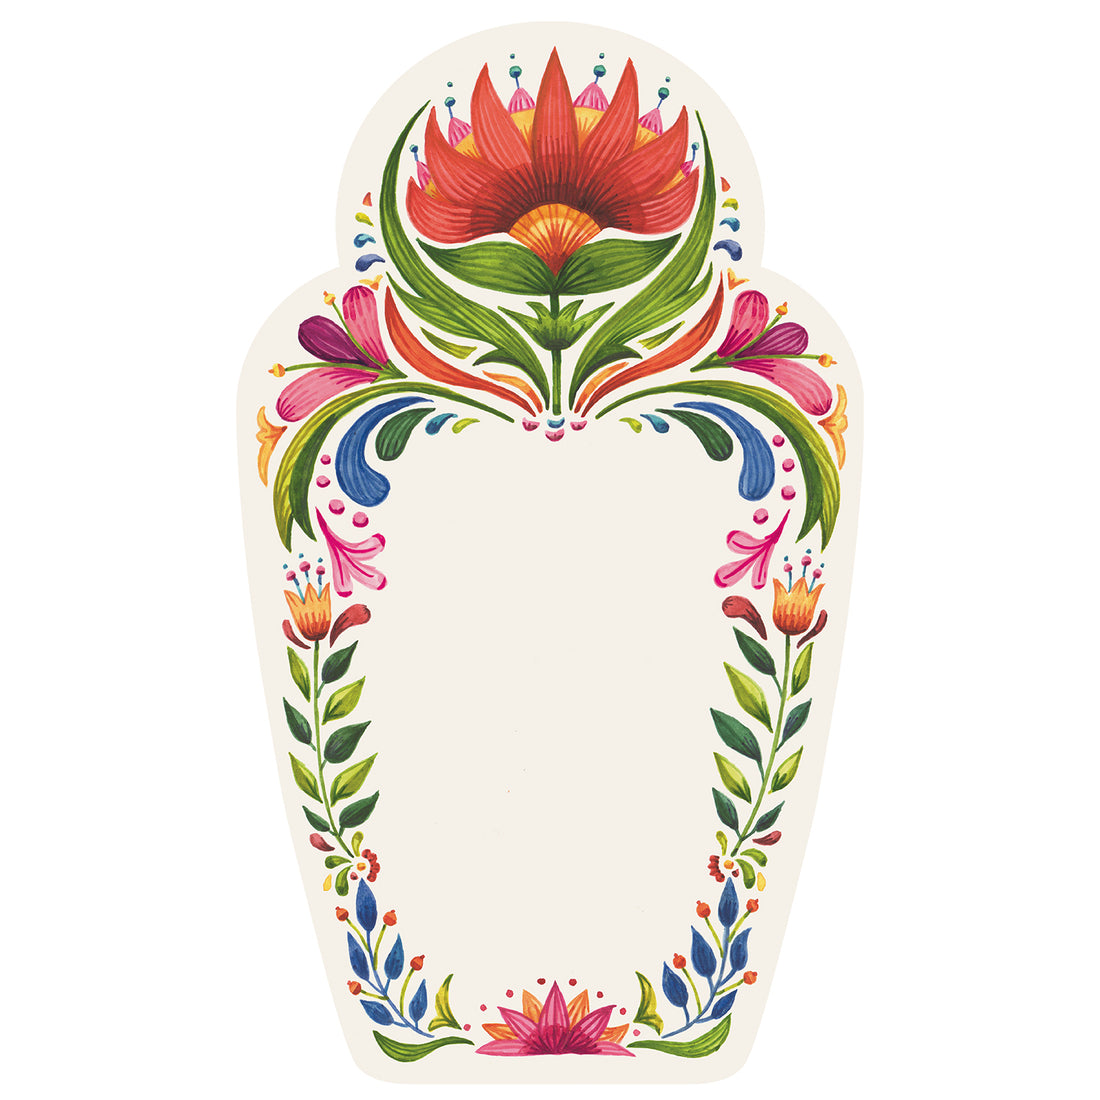 A colorful Hester &amp; Cook Fiesta Floral Table Card design on a white background with ample writing space.